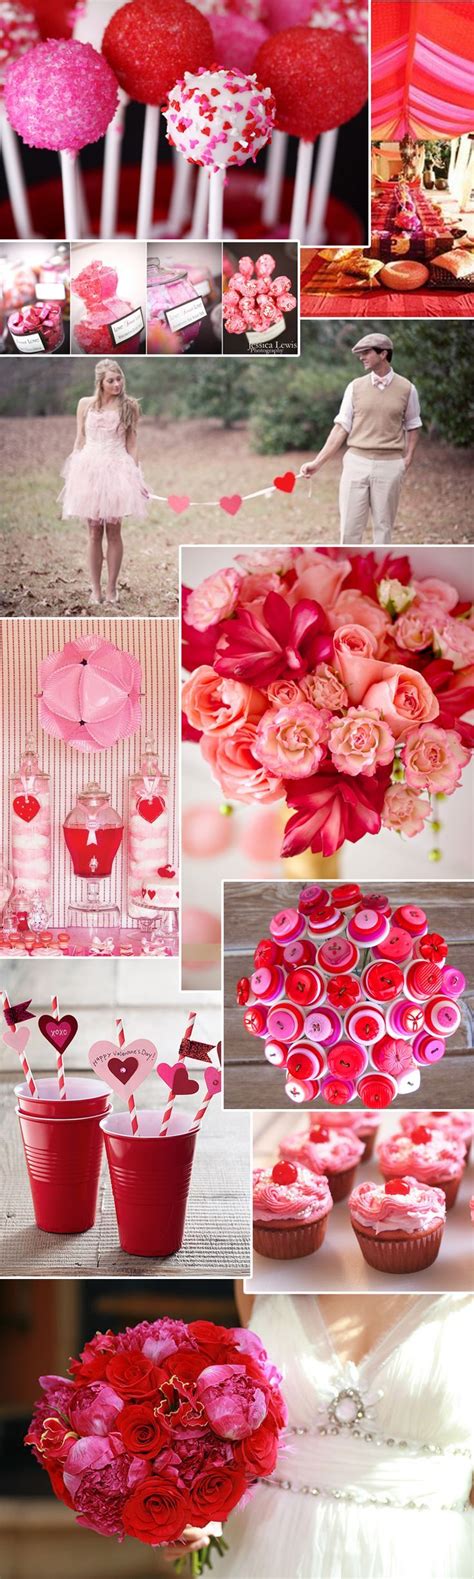 Cupids Cutest Pink And Red Themed Weddings Red Wedding Theme Red